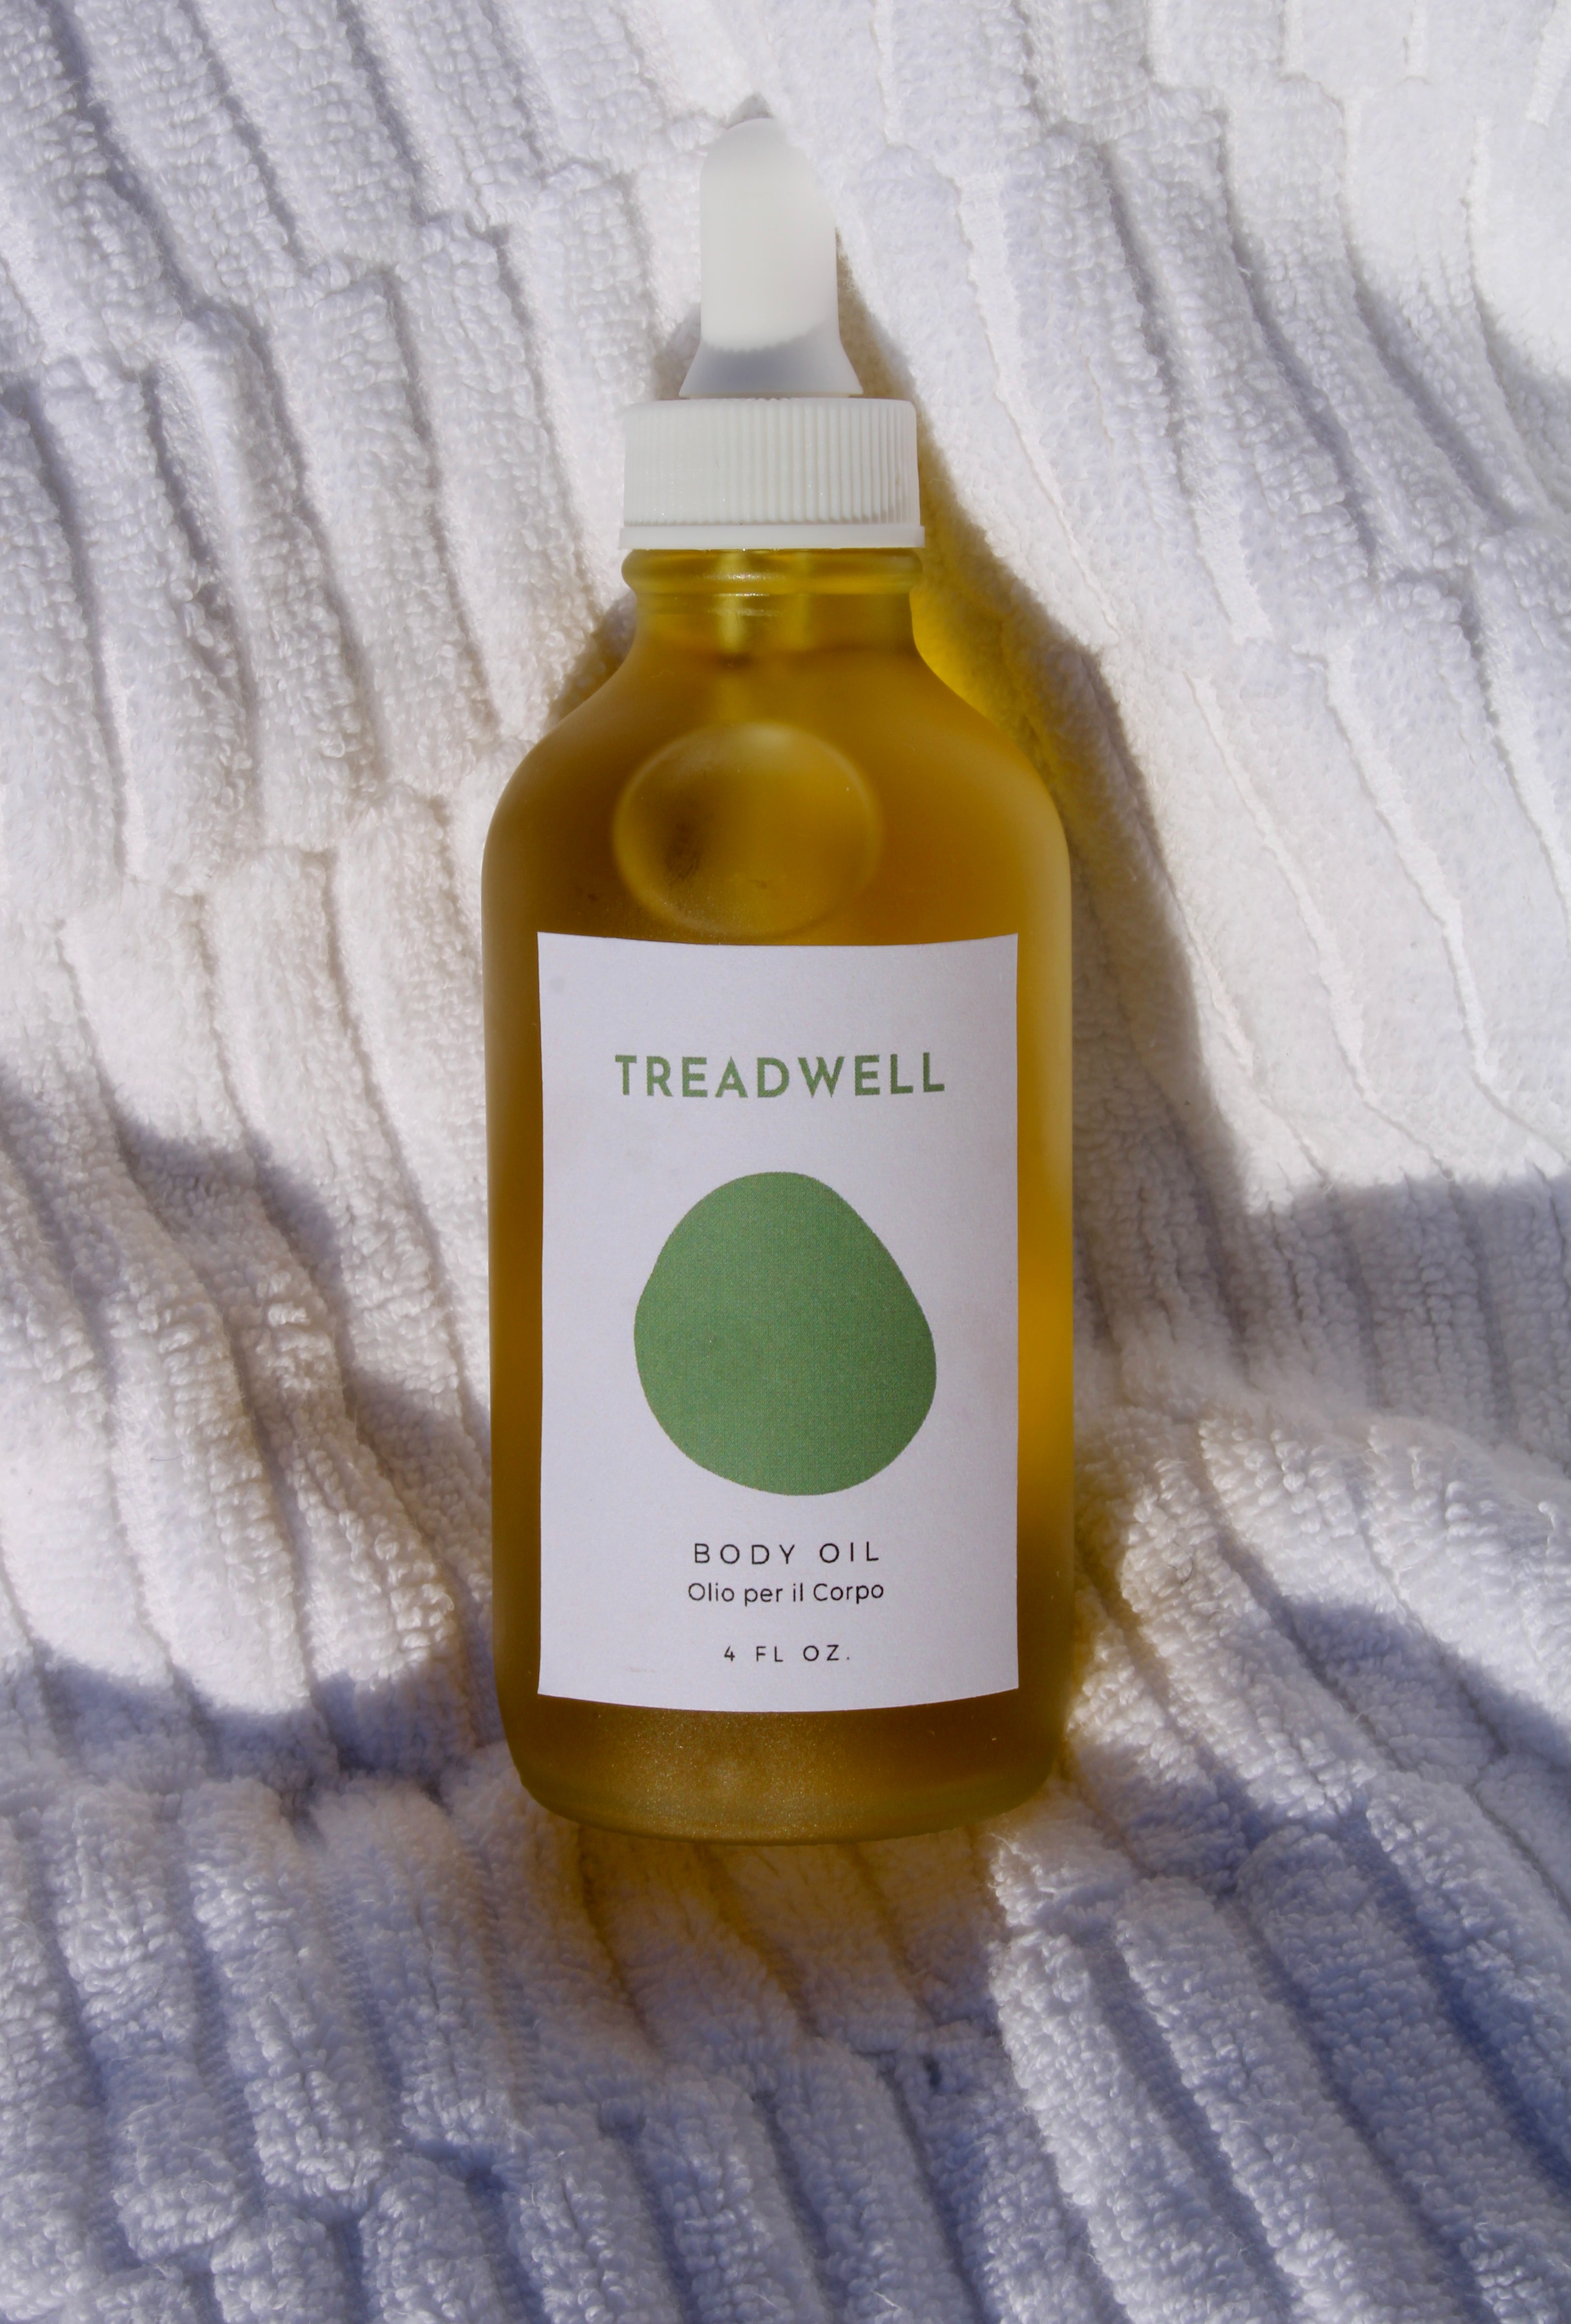 a bottle of body oil on a white towel